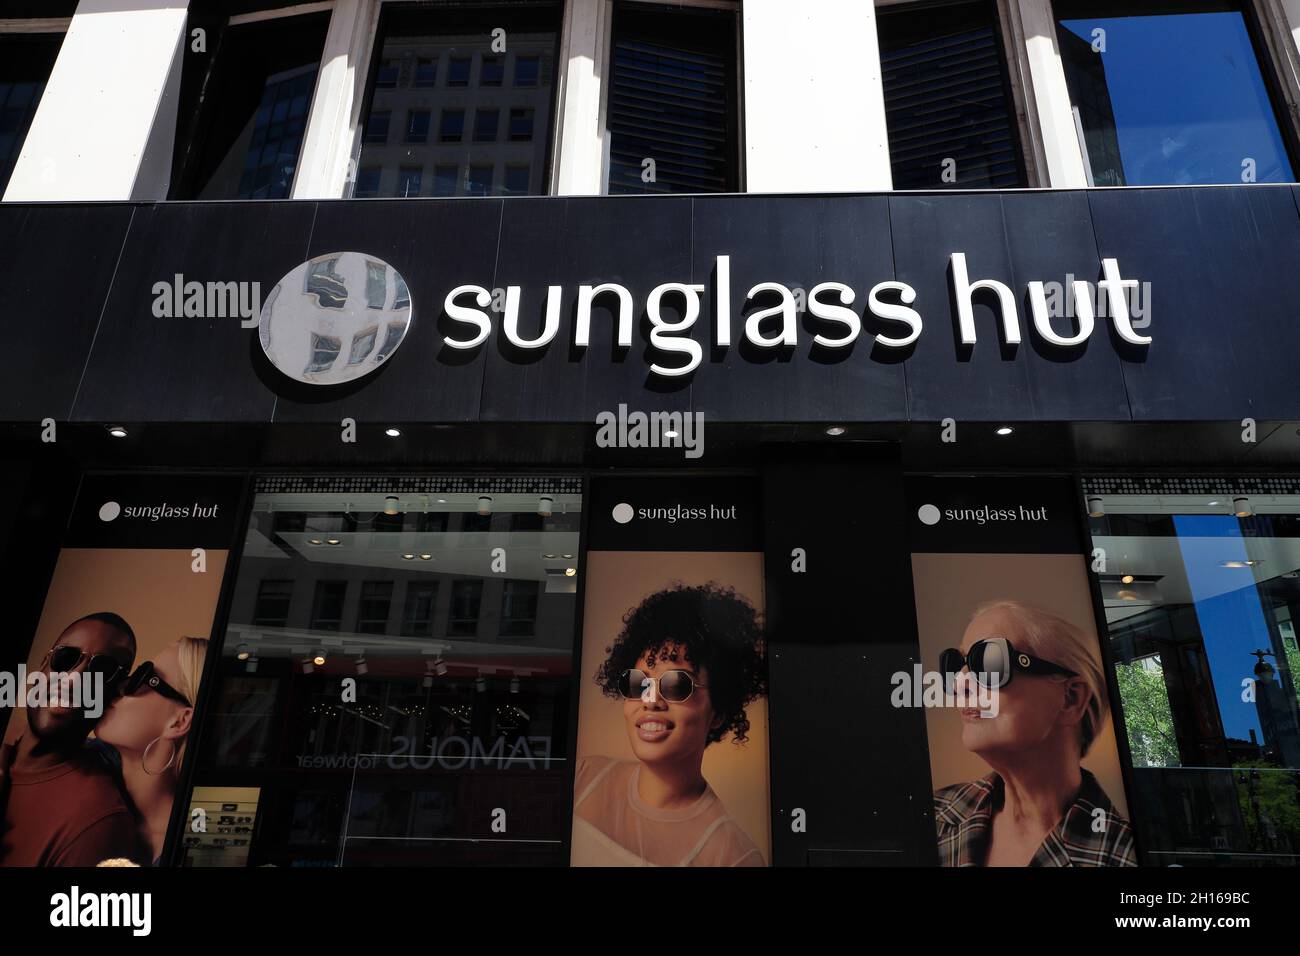 the storefront of sunglass hut at 34th streetmidtown manhattannew york cityusa 2H169BC